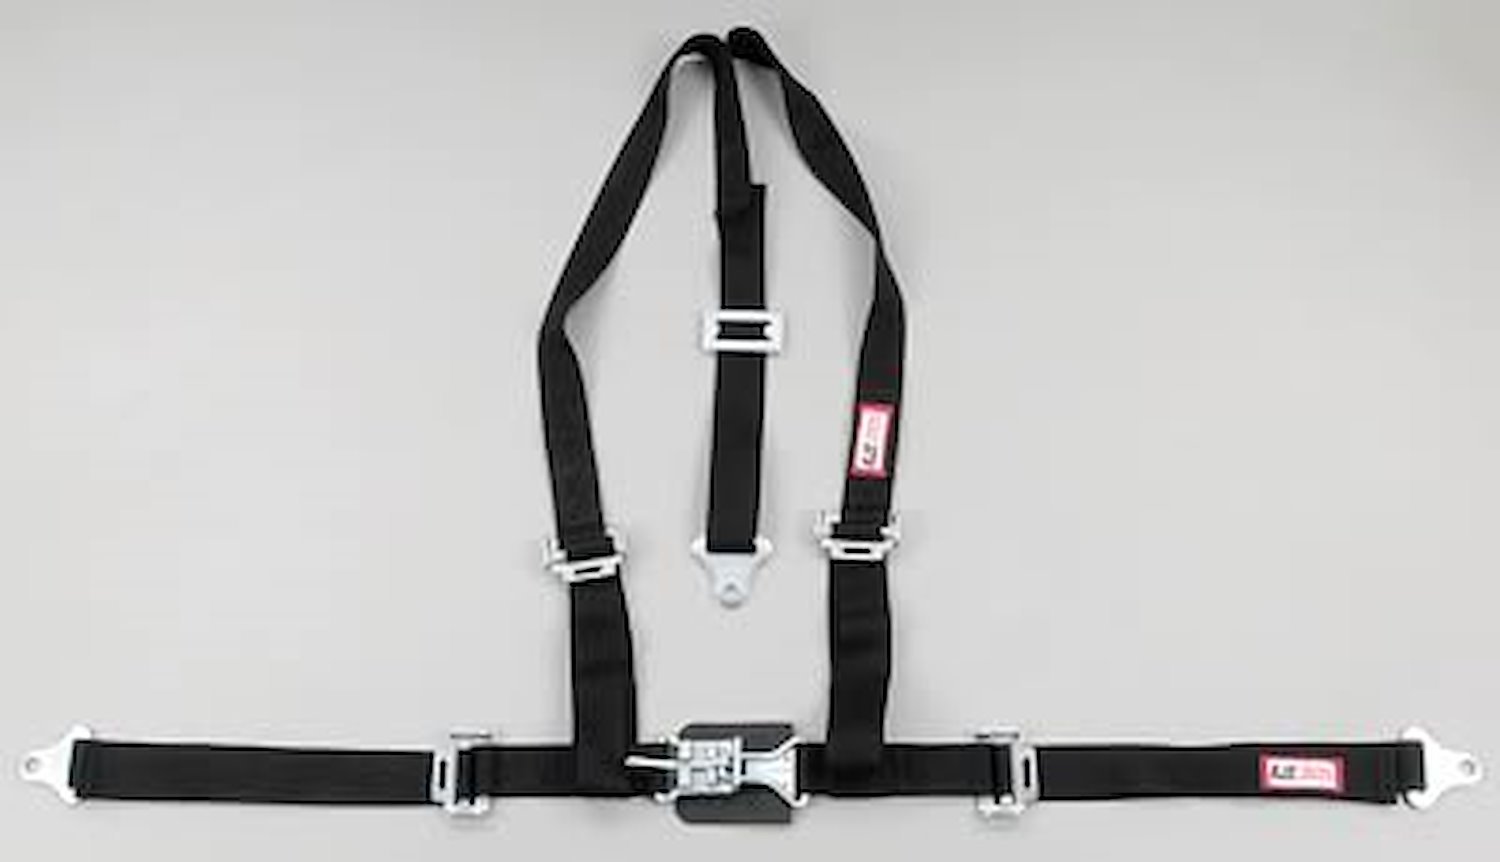 NON-SFI L&L HARNESS 3 PULL UP Lap BELT SNAP SEWN IN 2 S.H. Y FLOOR Mount w/STERNUM STRAP WRAP/BOLT GRAY